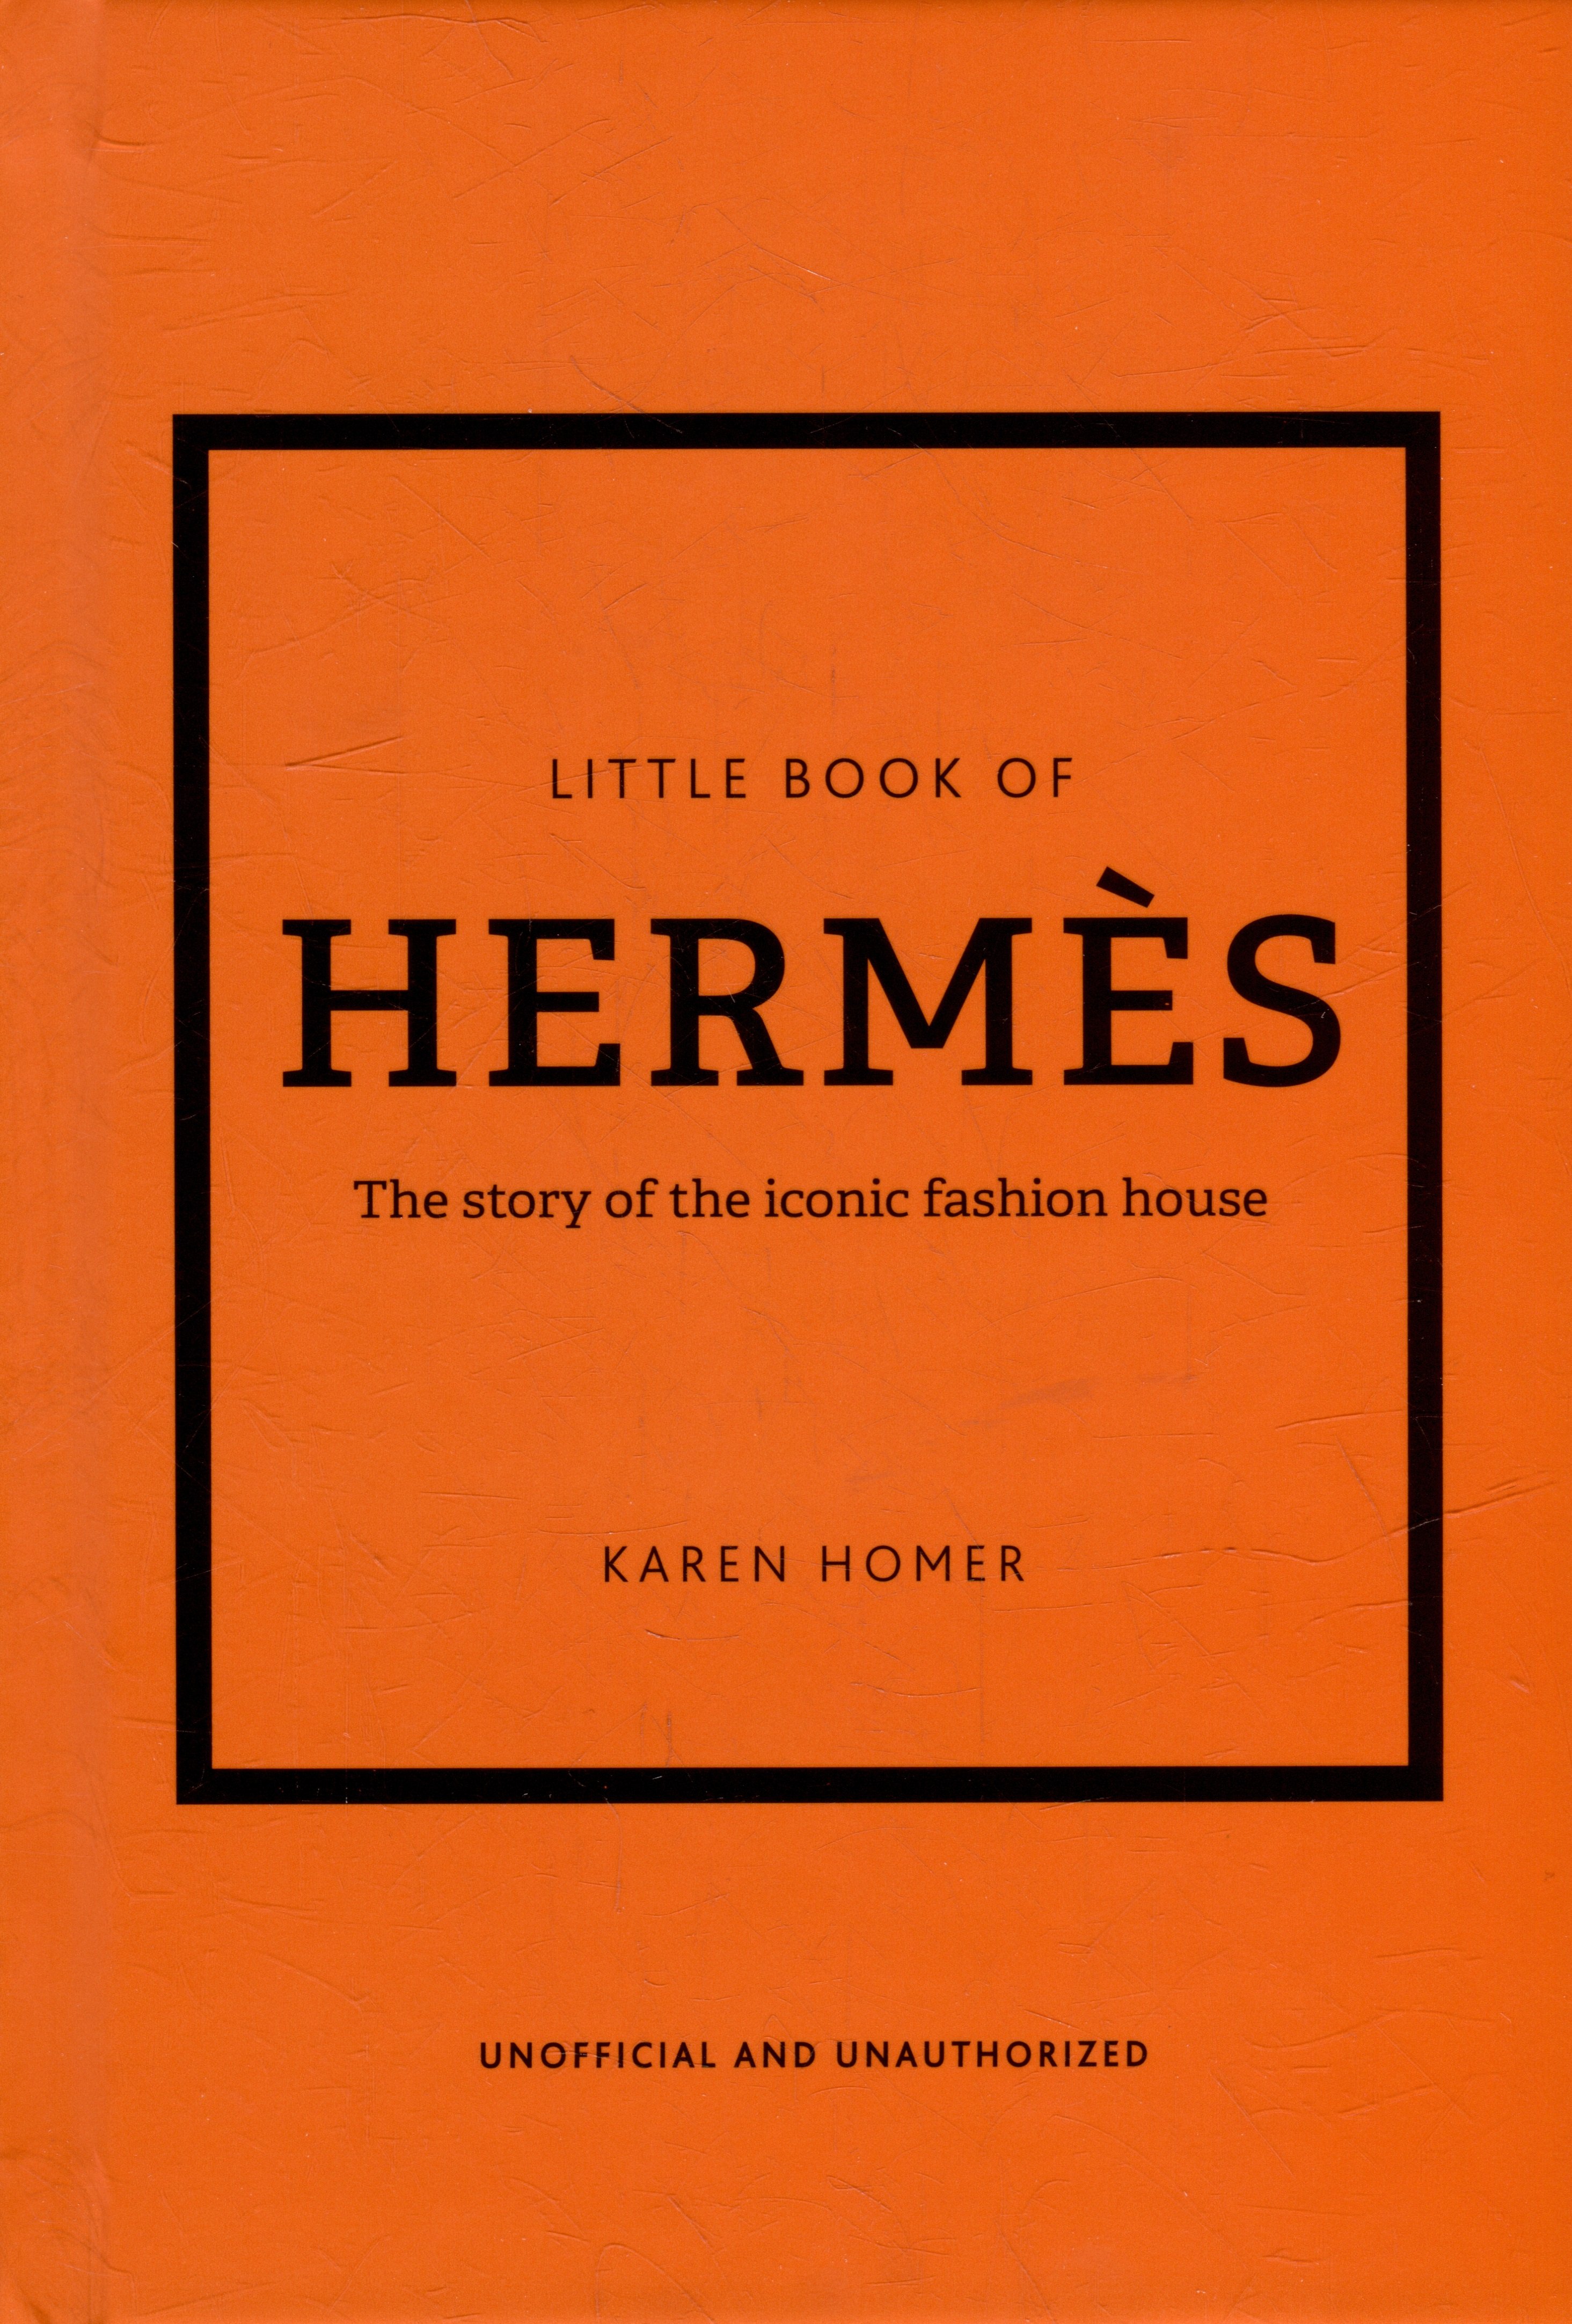 The Little Book of Hermes: The Story of the Iconic Fashion House